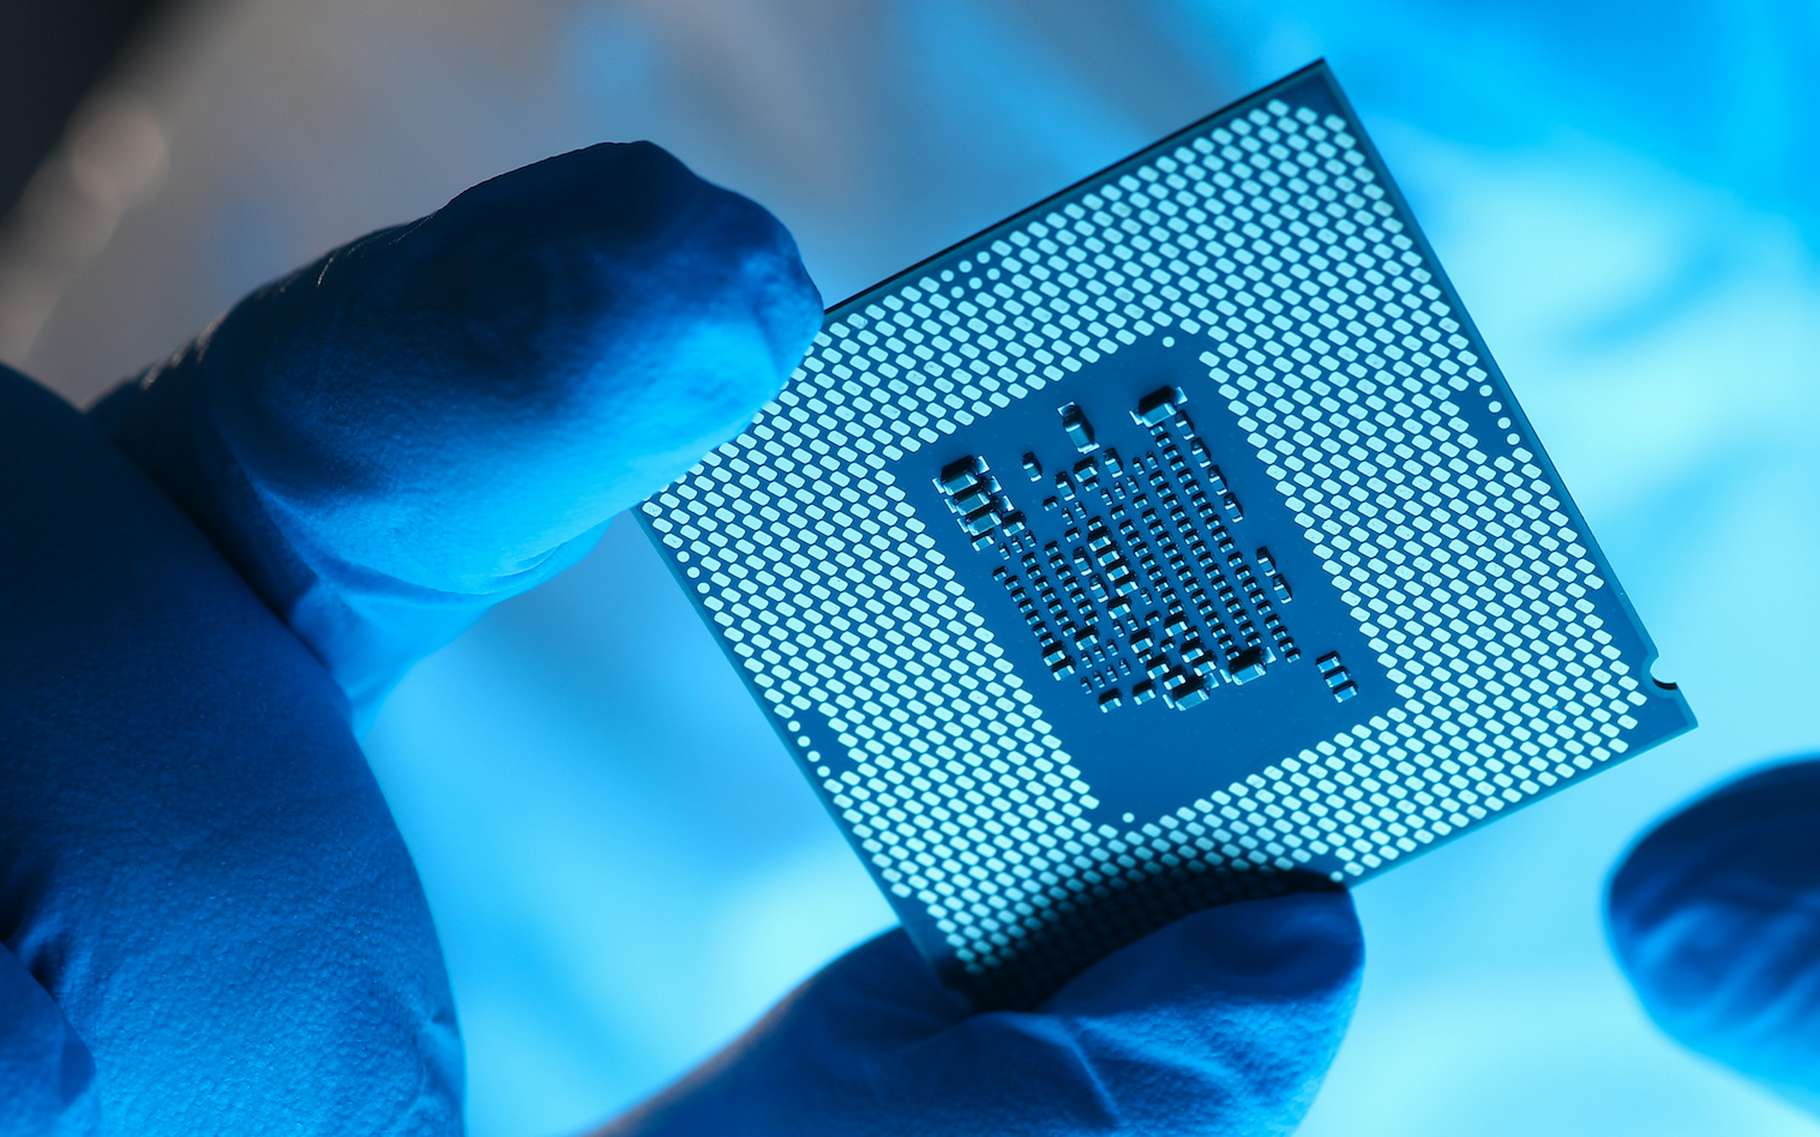 This is the world’s best semiconductor, according to MIT